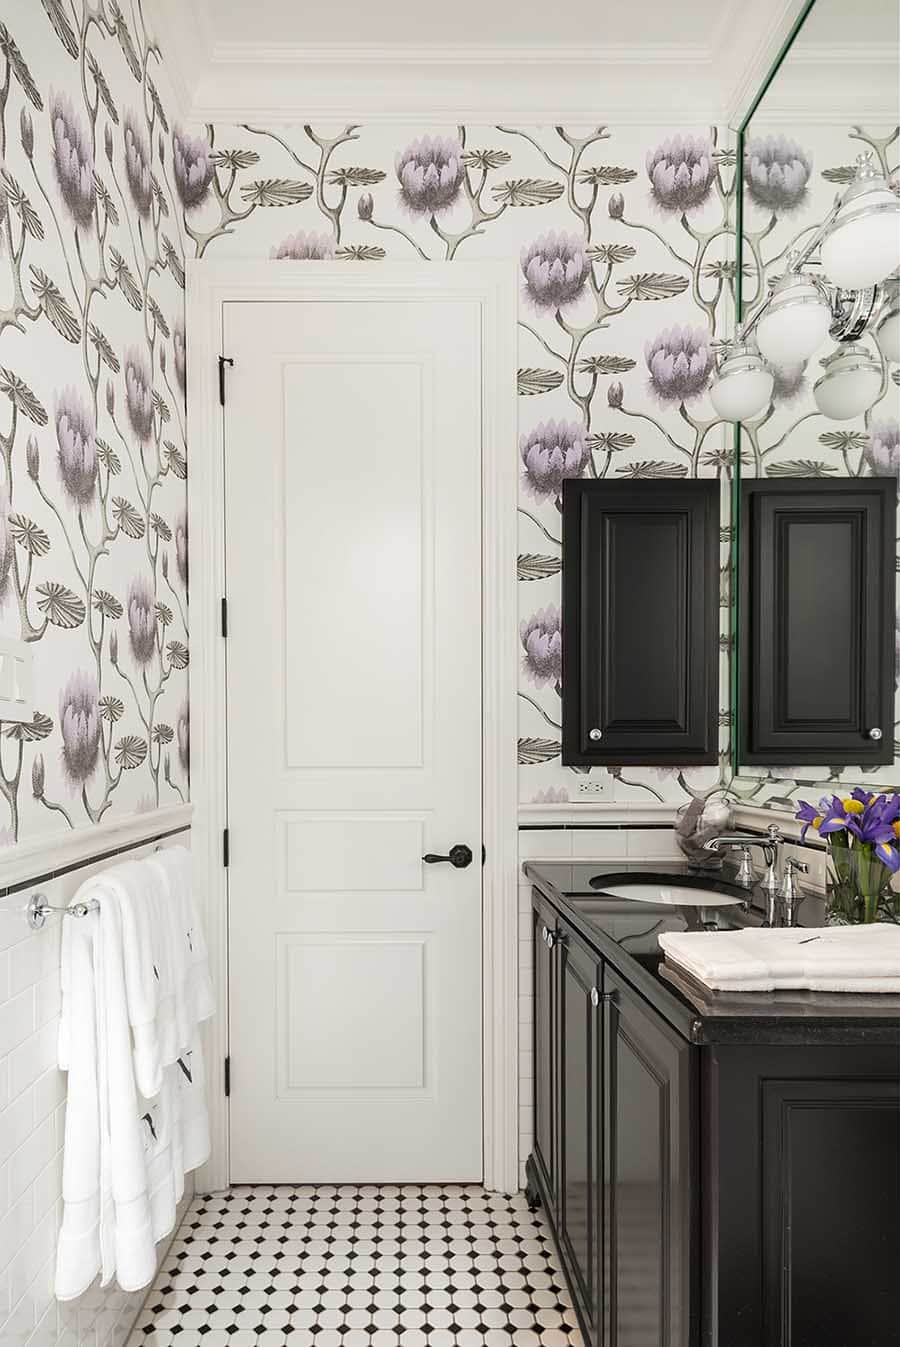 Powder bath wallpaper install, Cole and Sons Summer Lily, Farrow and Ball Pitch Black cabinet paint, by Paper Moon Painting, Alamo Heights